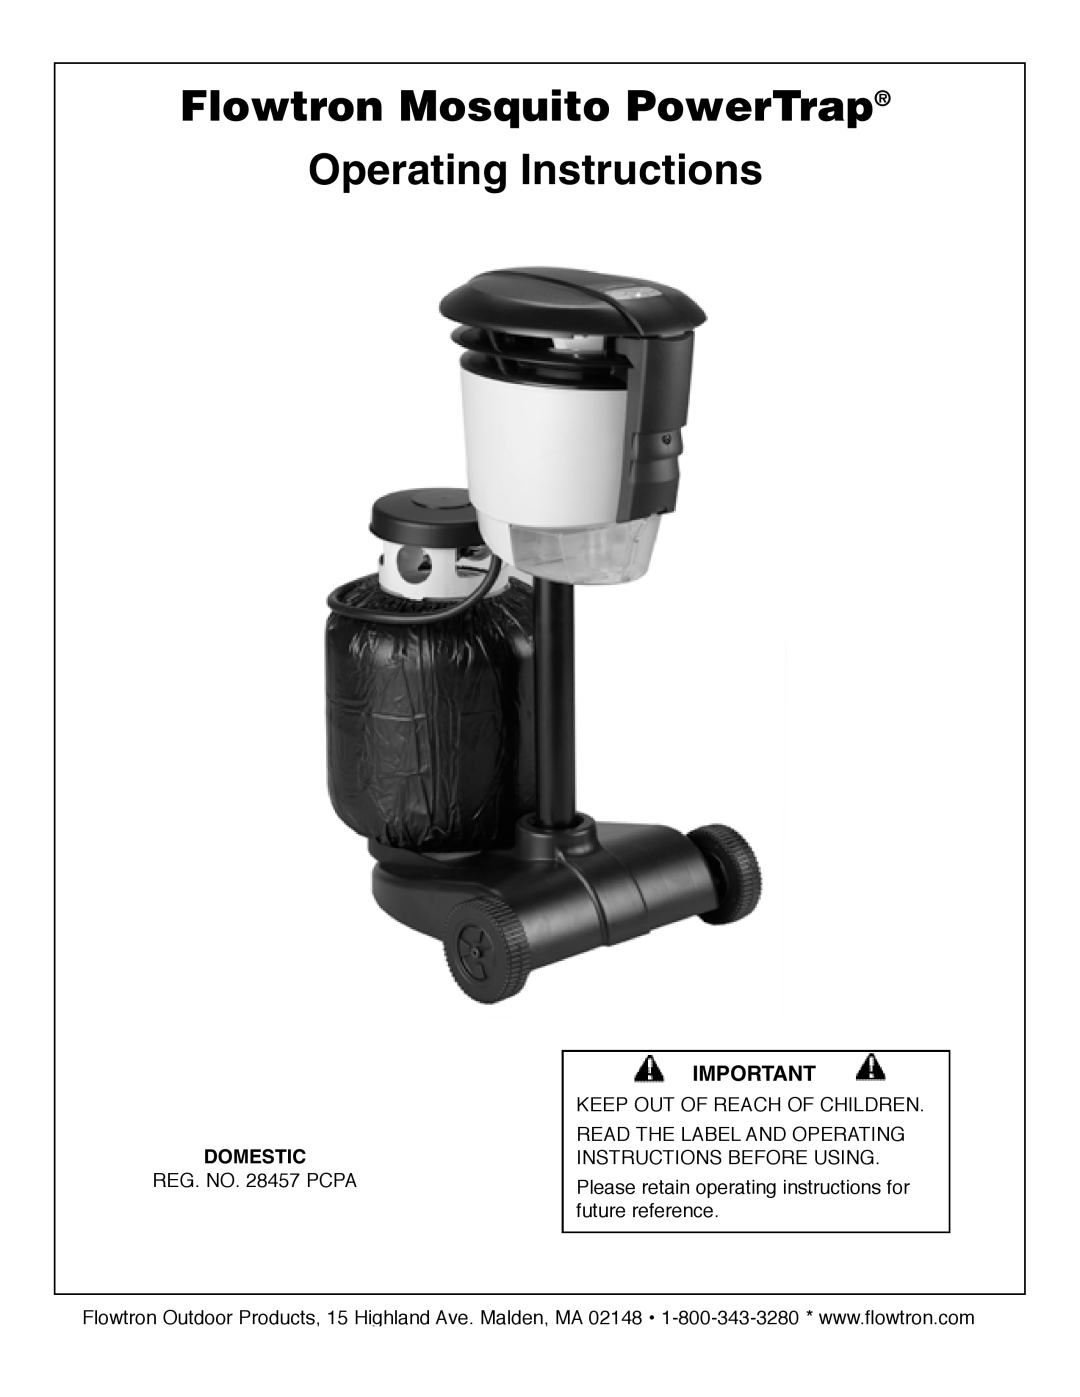 Flowtron Outdoor Products MT-200 Series, MT-300 Series manual Flowtron Mosquito PowerTrap Operating Instructions, Domestic 